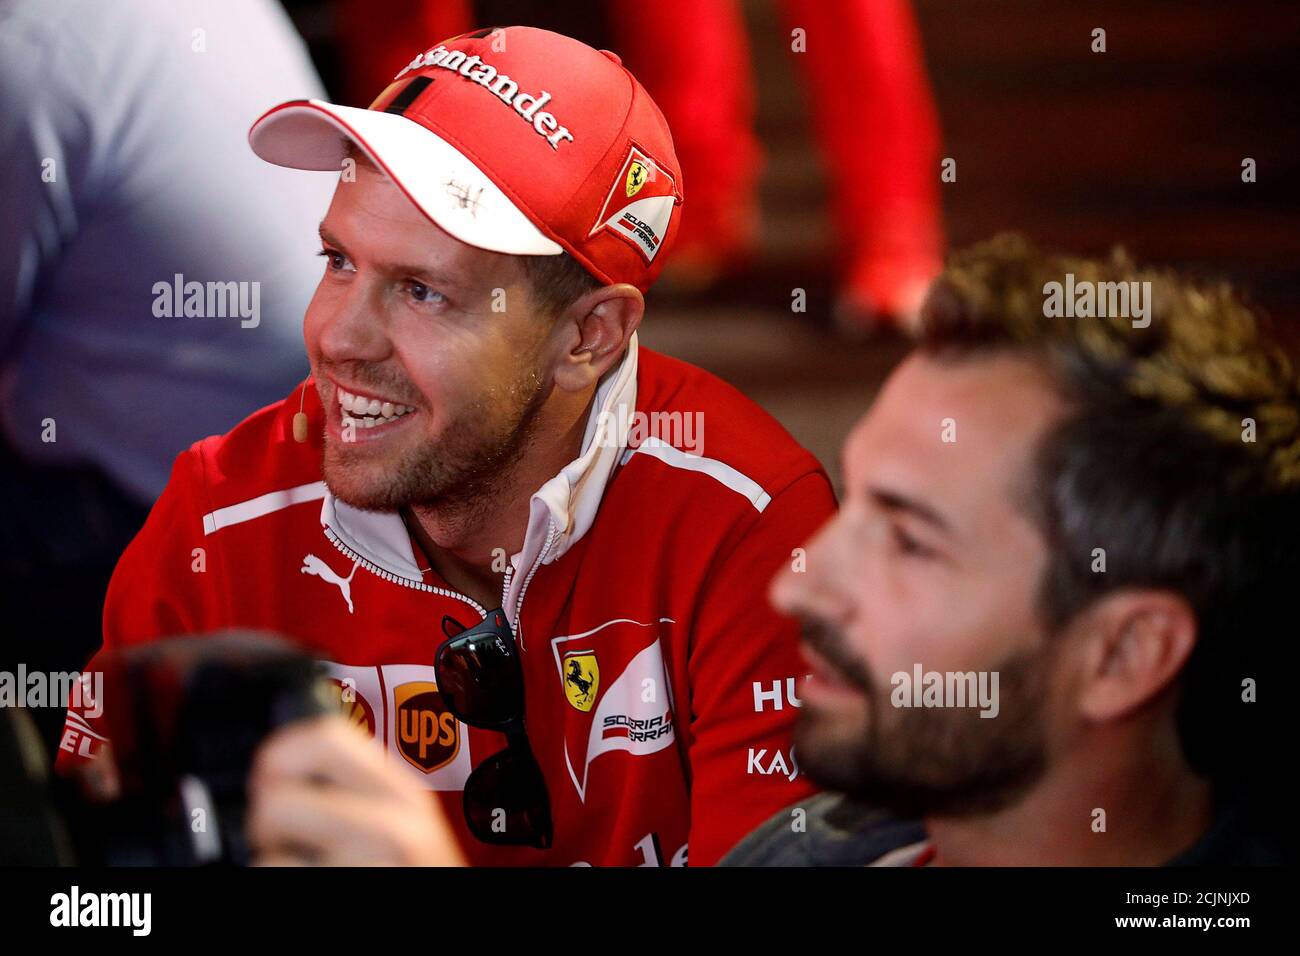 Ferrari's Sebastian Vettel of Germany smiles next to a racing simulator ahead of the Mexican F1 Grand Prix on October 29, in Mexico City, Mexico, October 26, 2017. REUTERS/Edgard Garrido Stock Photo